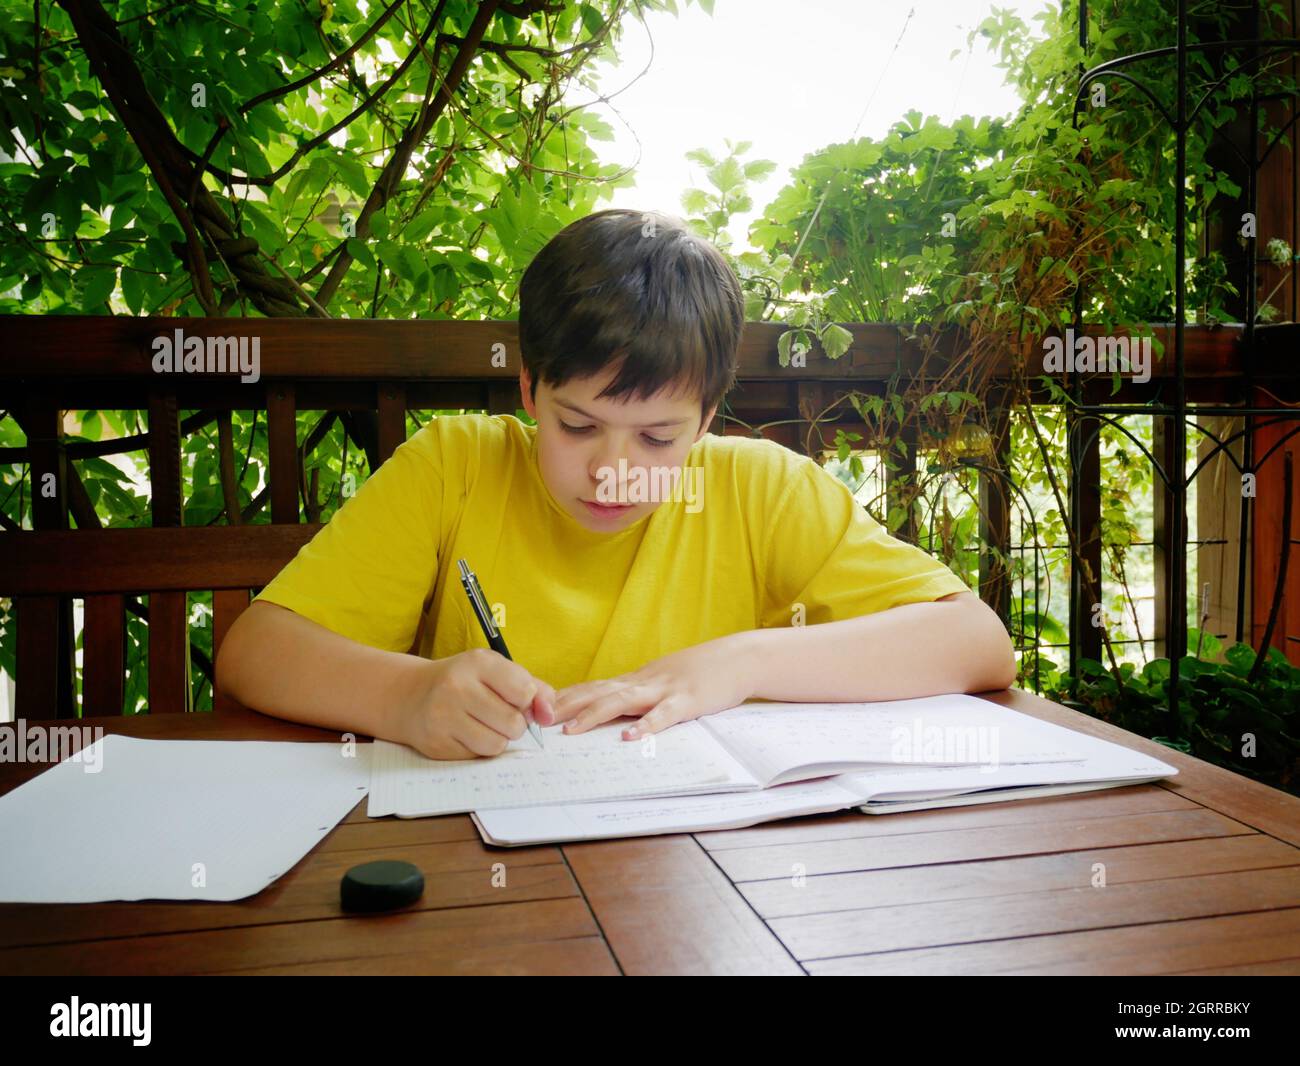 Boy Studying At Table In Porch Stock Photo